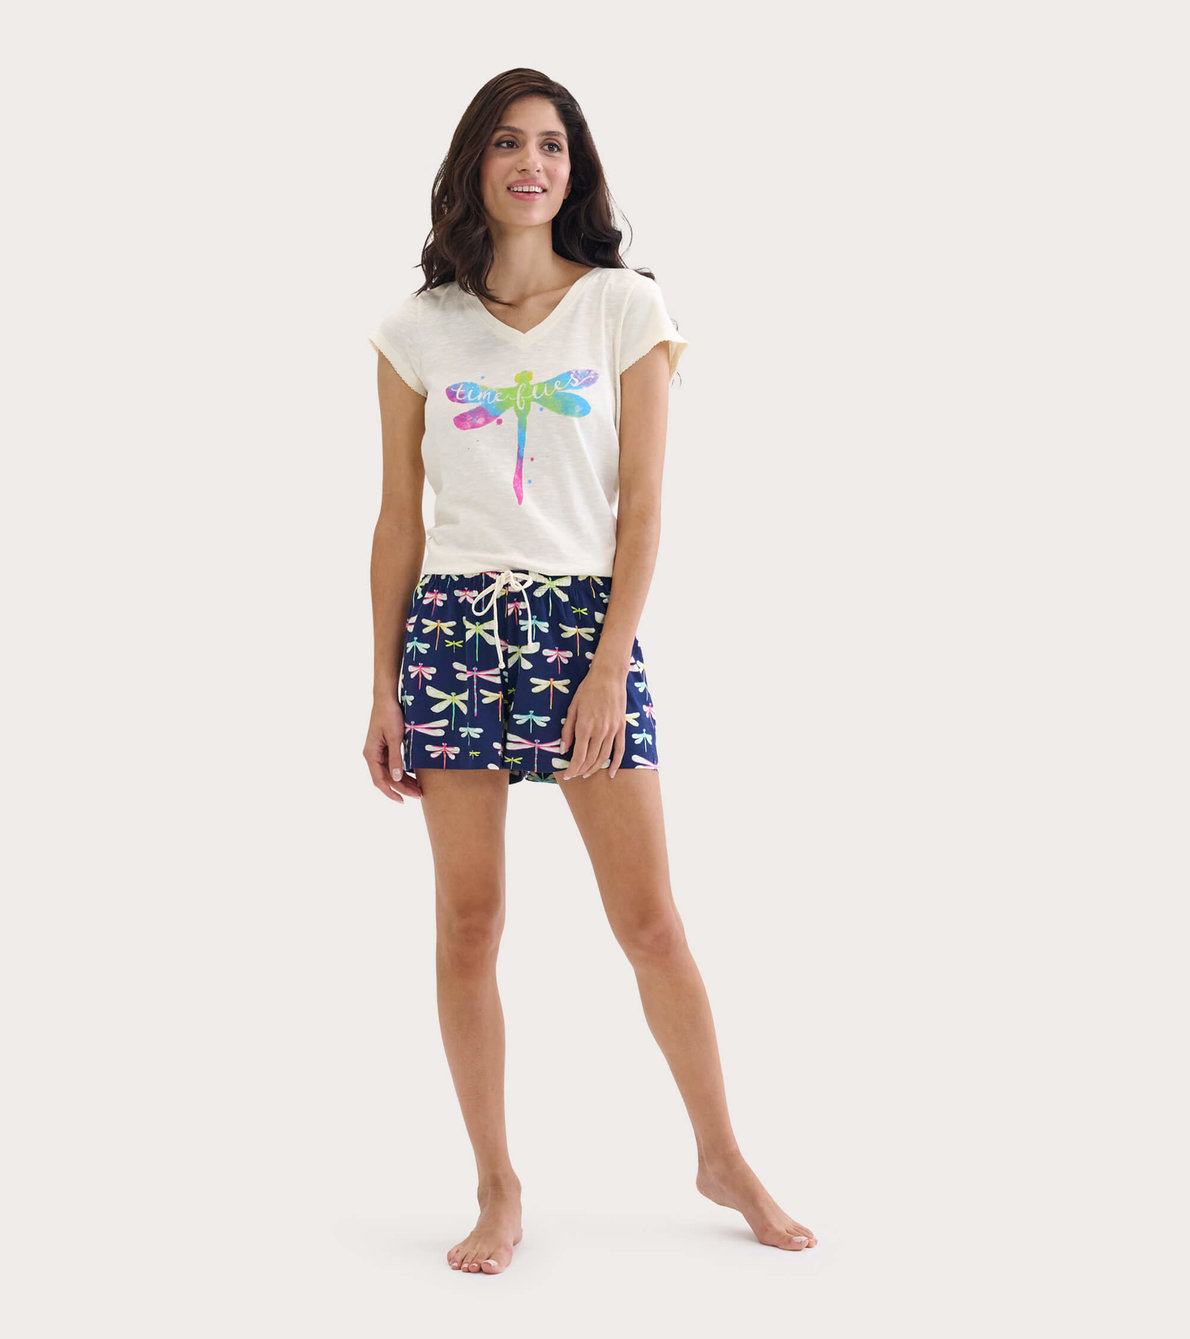 View larger image of Dragonfly Women's Tee and Shorts Pajama Separates